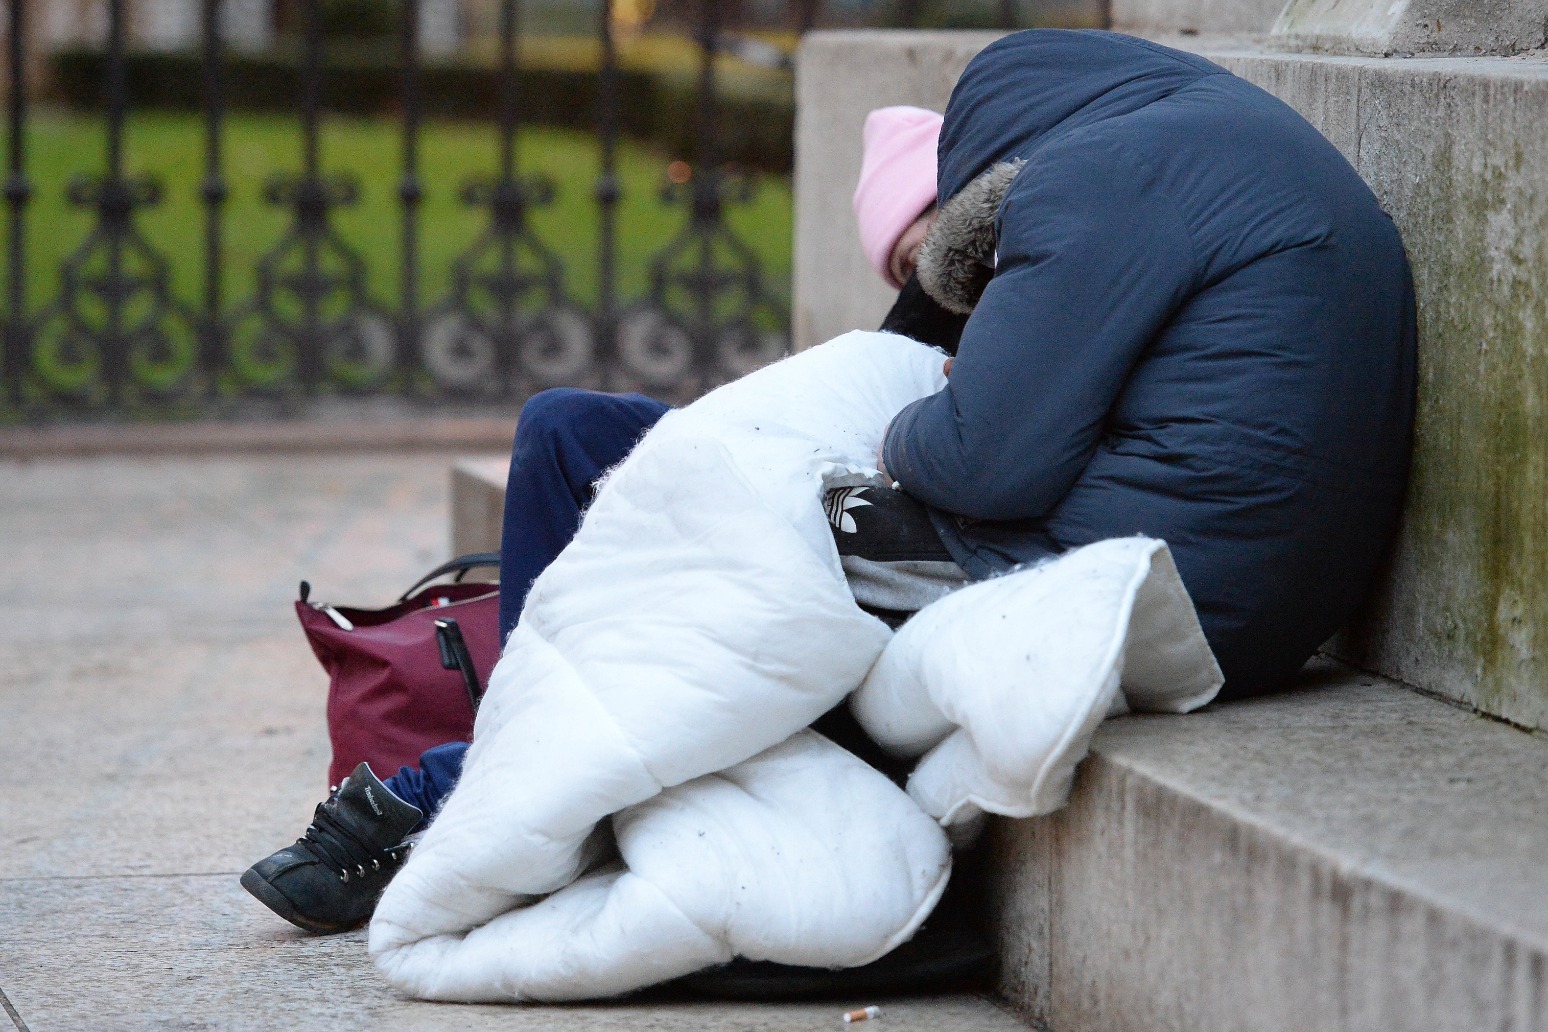 Warm and safe Christmas ‘beyond reach for too many’ as homelessness fund pledged 